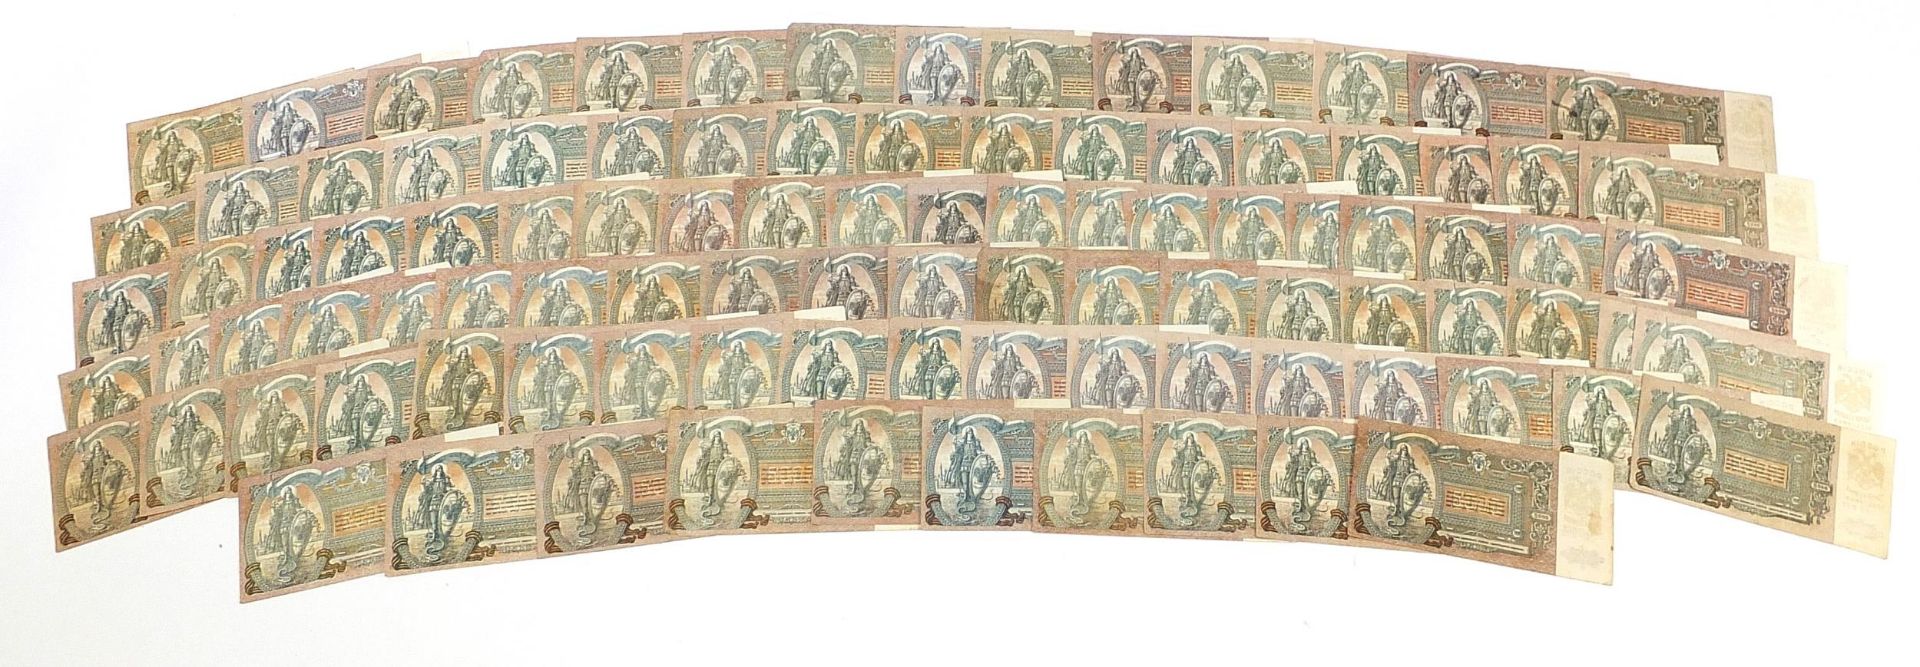 Large collection of approximately one hundred Russian 1919 five thousand rouble banknotes